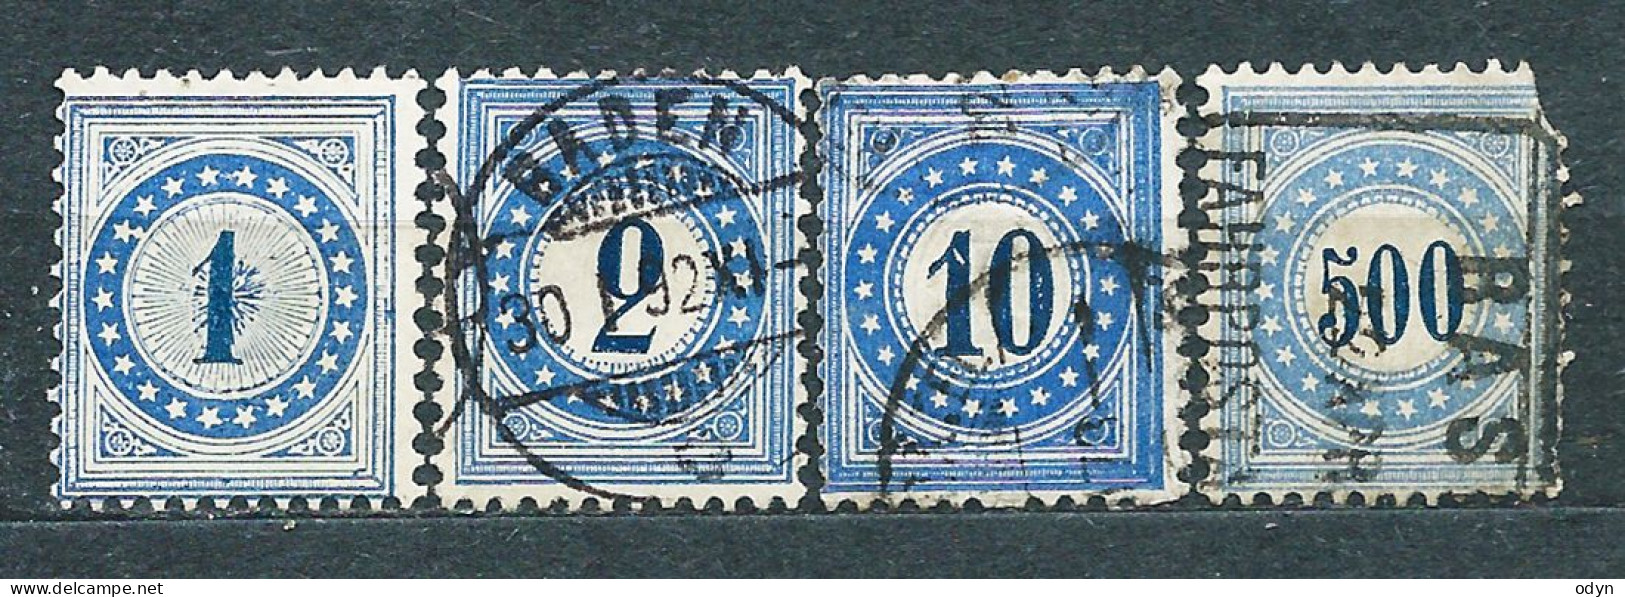 Switzerland, 1878-1938, Lot Of 42 Postal Due Stamps From Sets MiNr 1-9, 2-5, 8-10, 15-16, 17-20, 29-37 32-36 42-49 54-61 - Impuesto